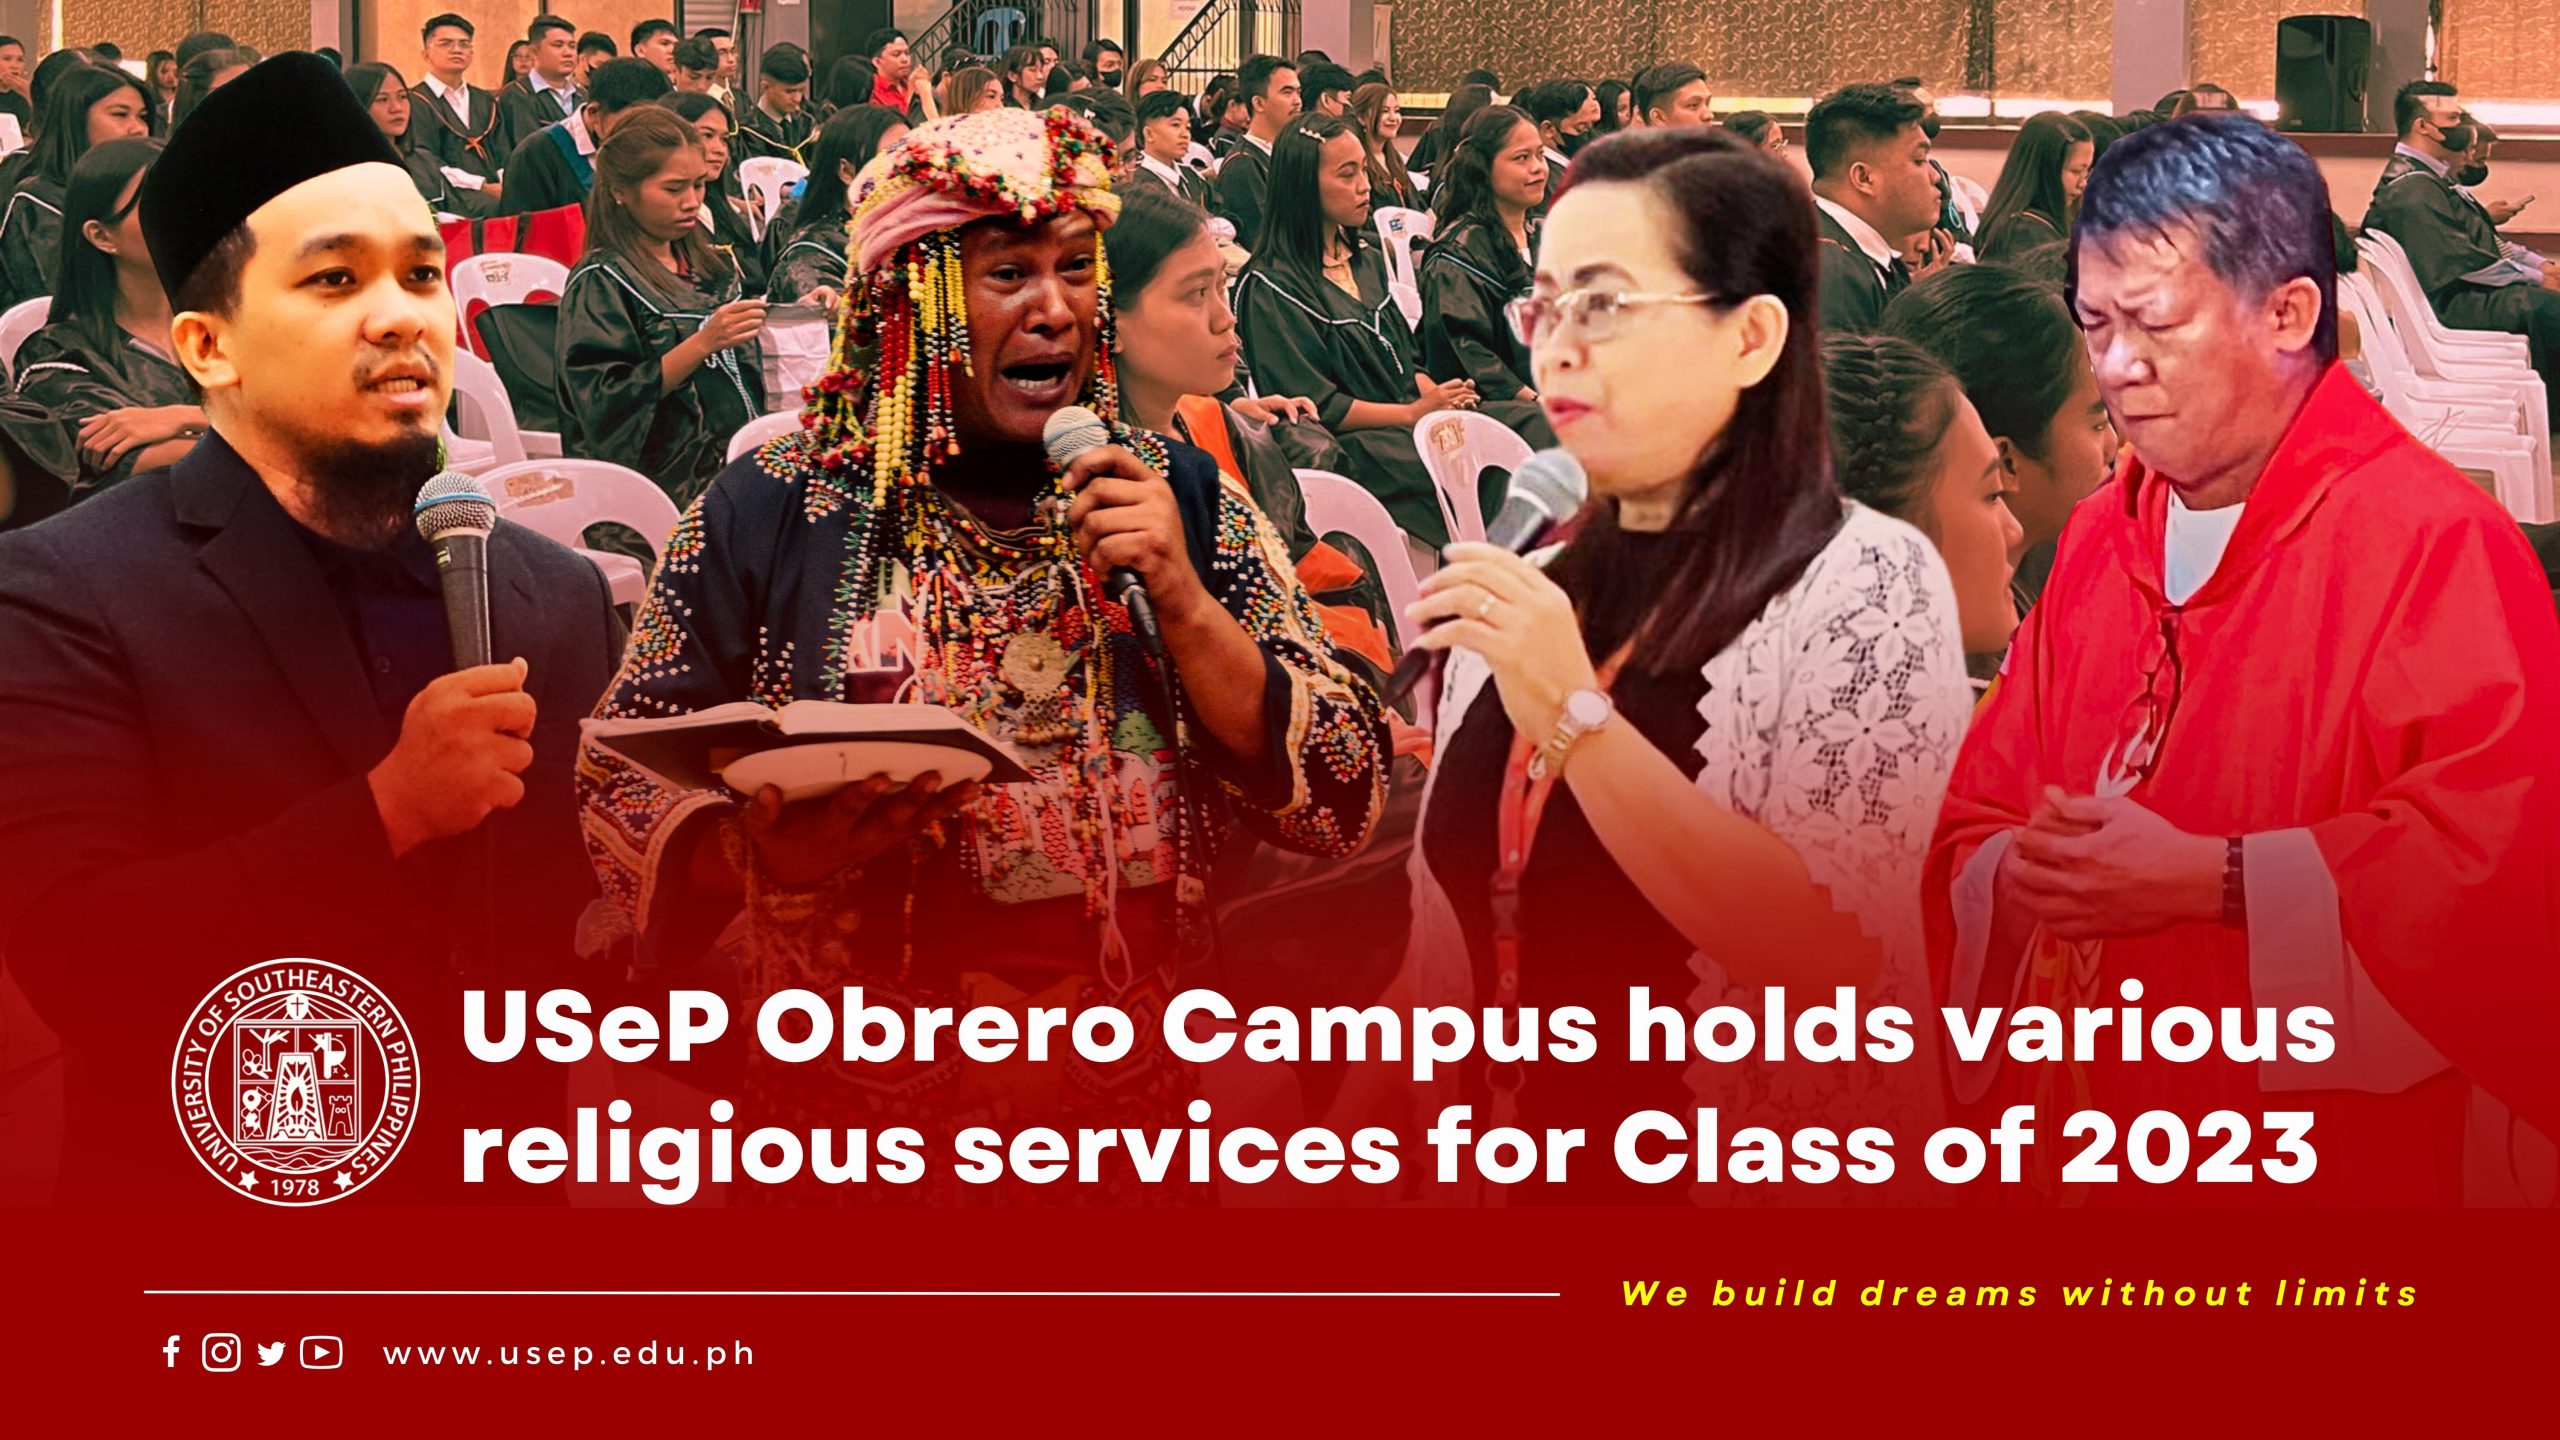 USeP Obrero Campus holds various religious services for Class of 2023